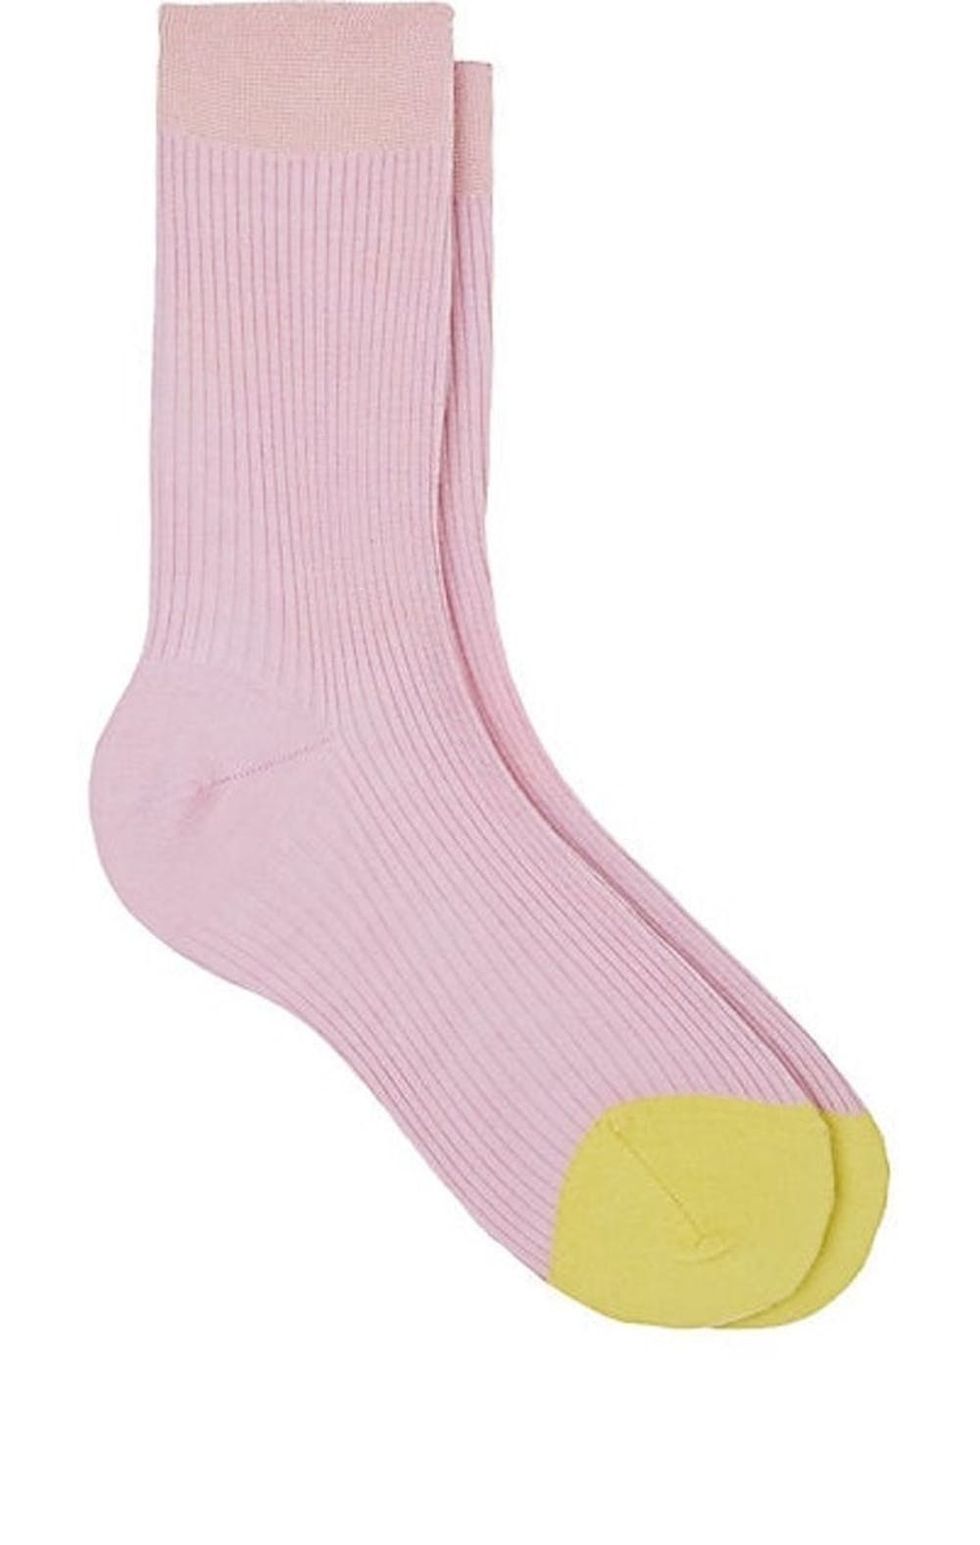 12 Statement Socks That Will Transform Your Look - Brit + Co